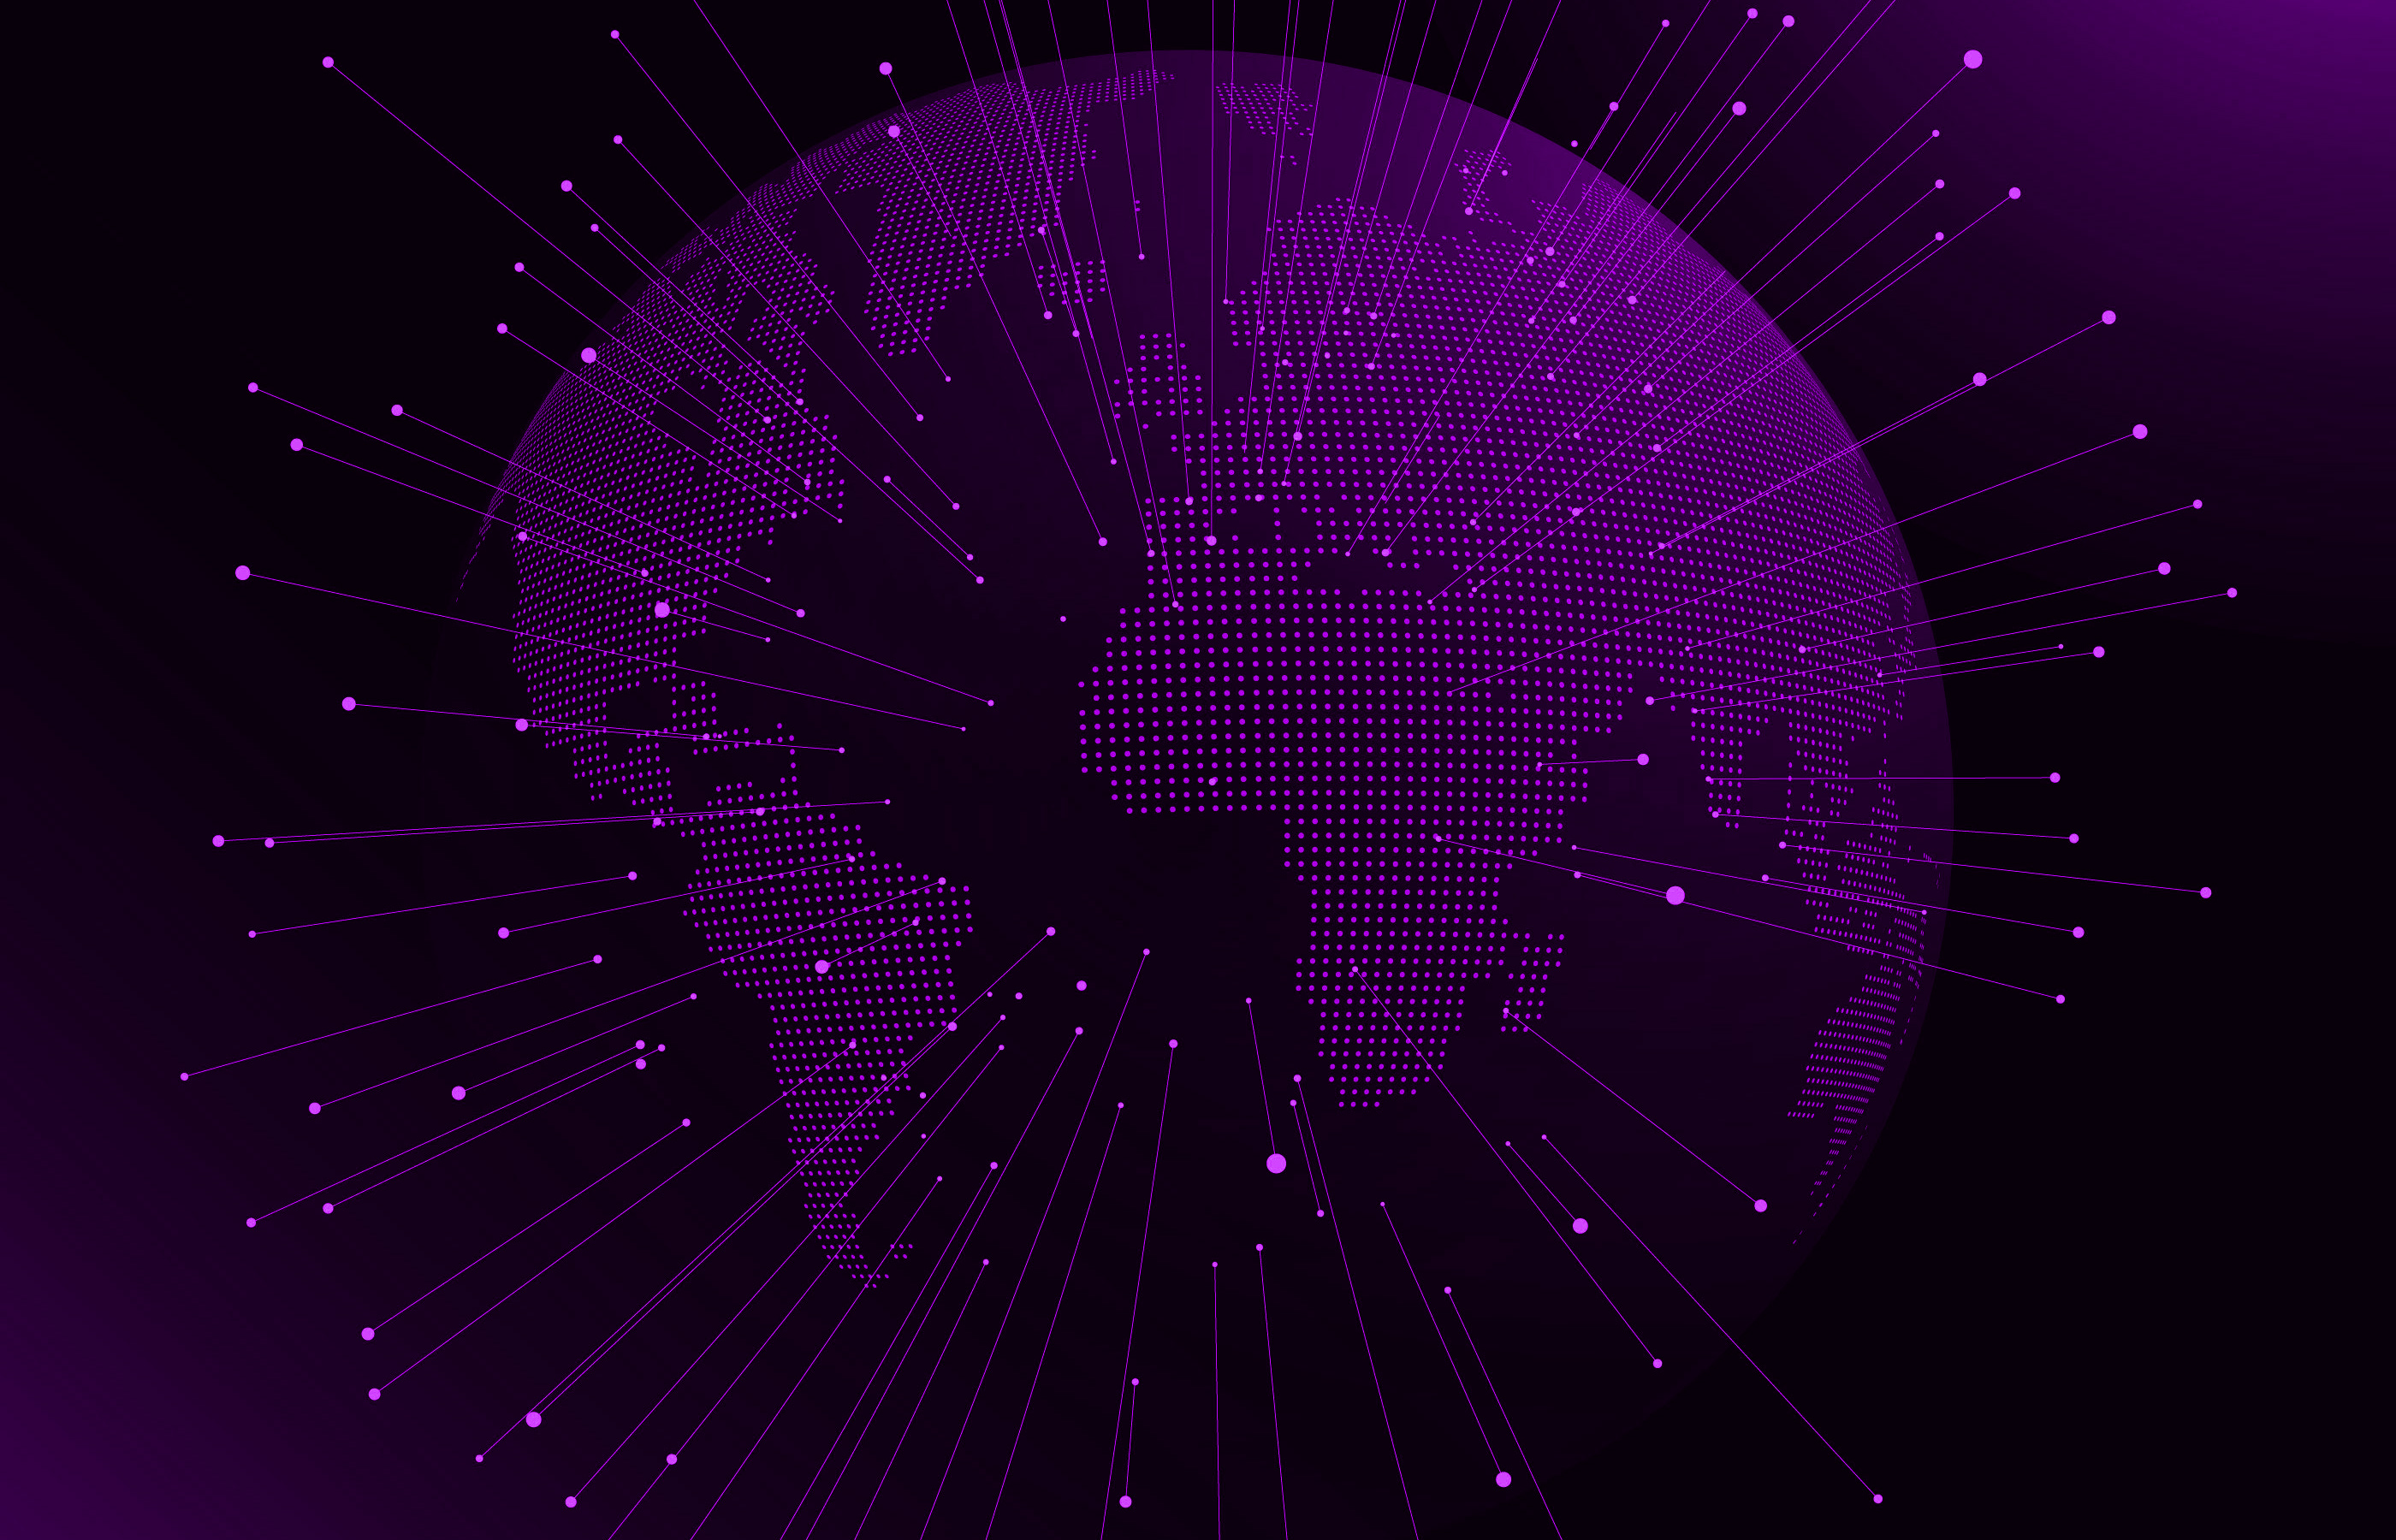 Download wallpaper Purple digital globe, Purple digital background, global networks, dots globe silhouette, digital technology, Purple technology background for desktop with resolution 2800x1800. High Quality HD picture wallpaper